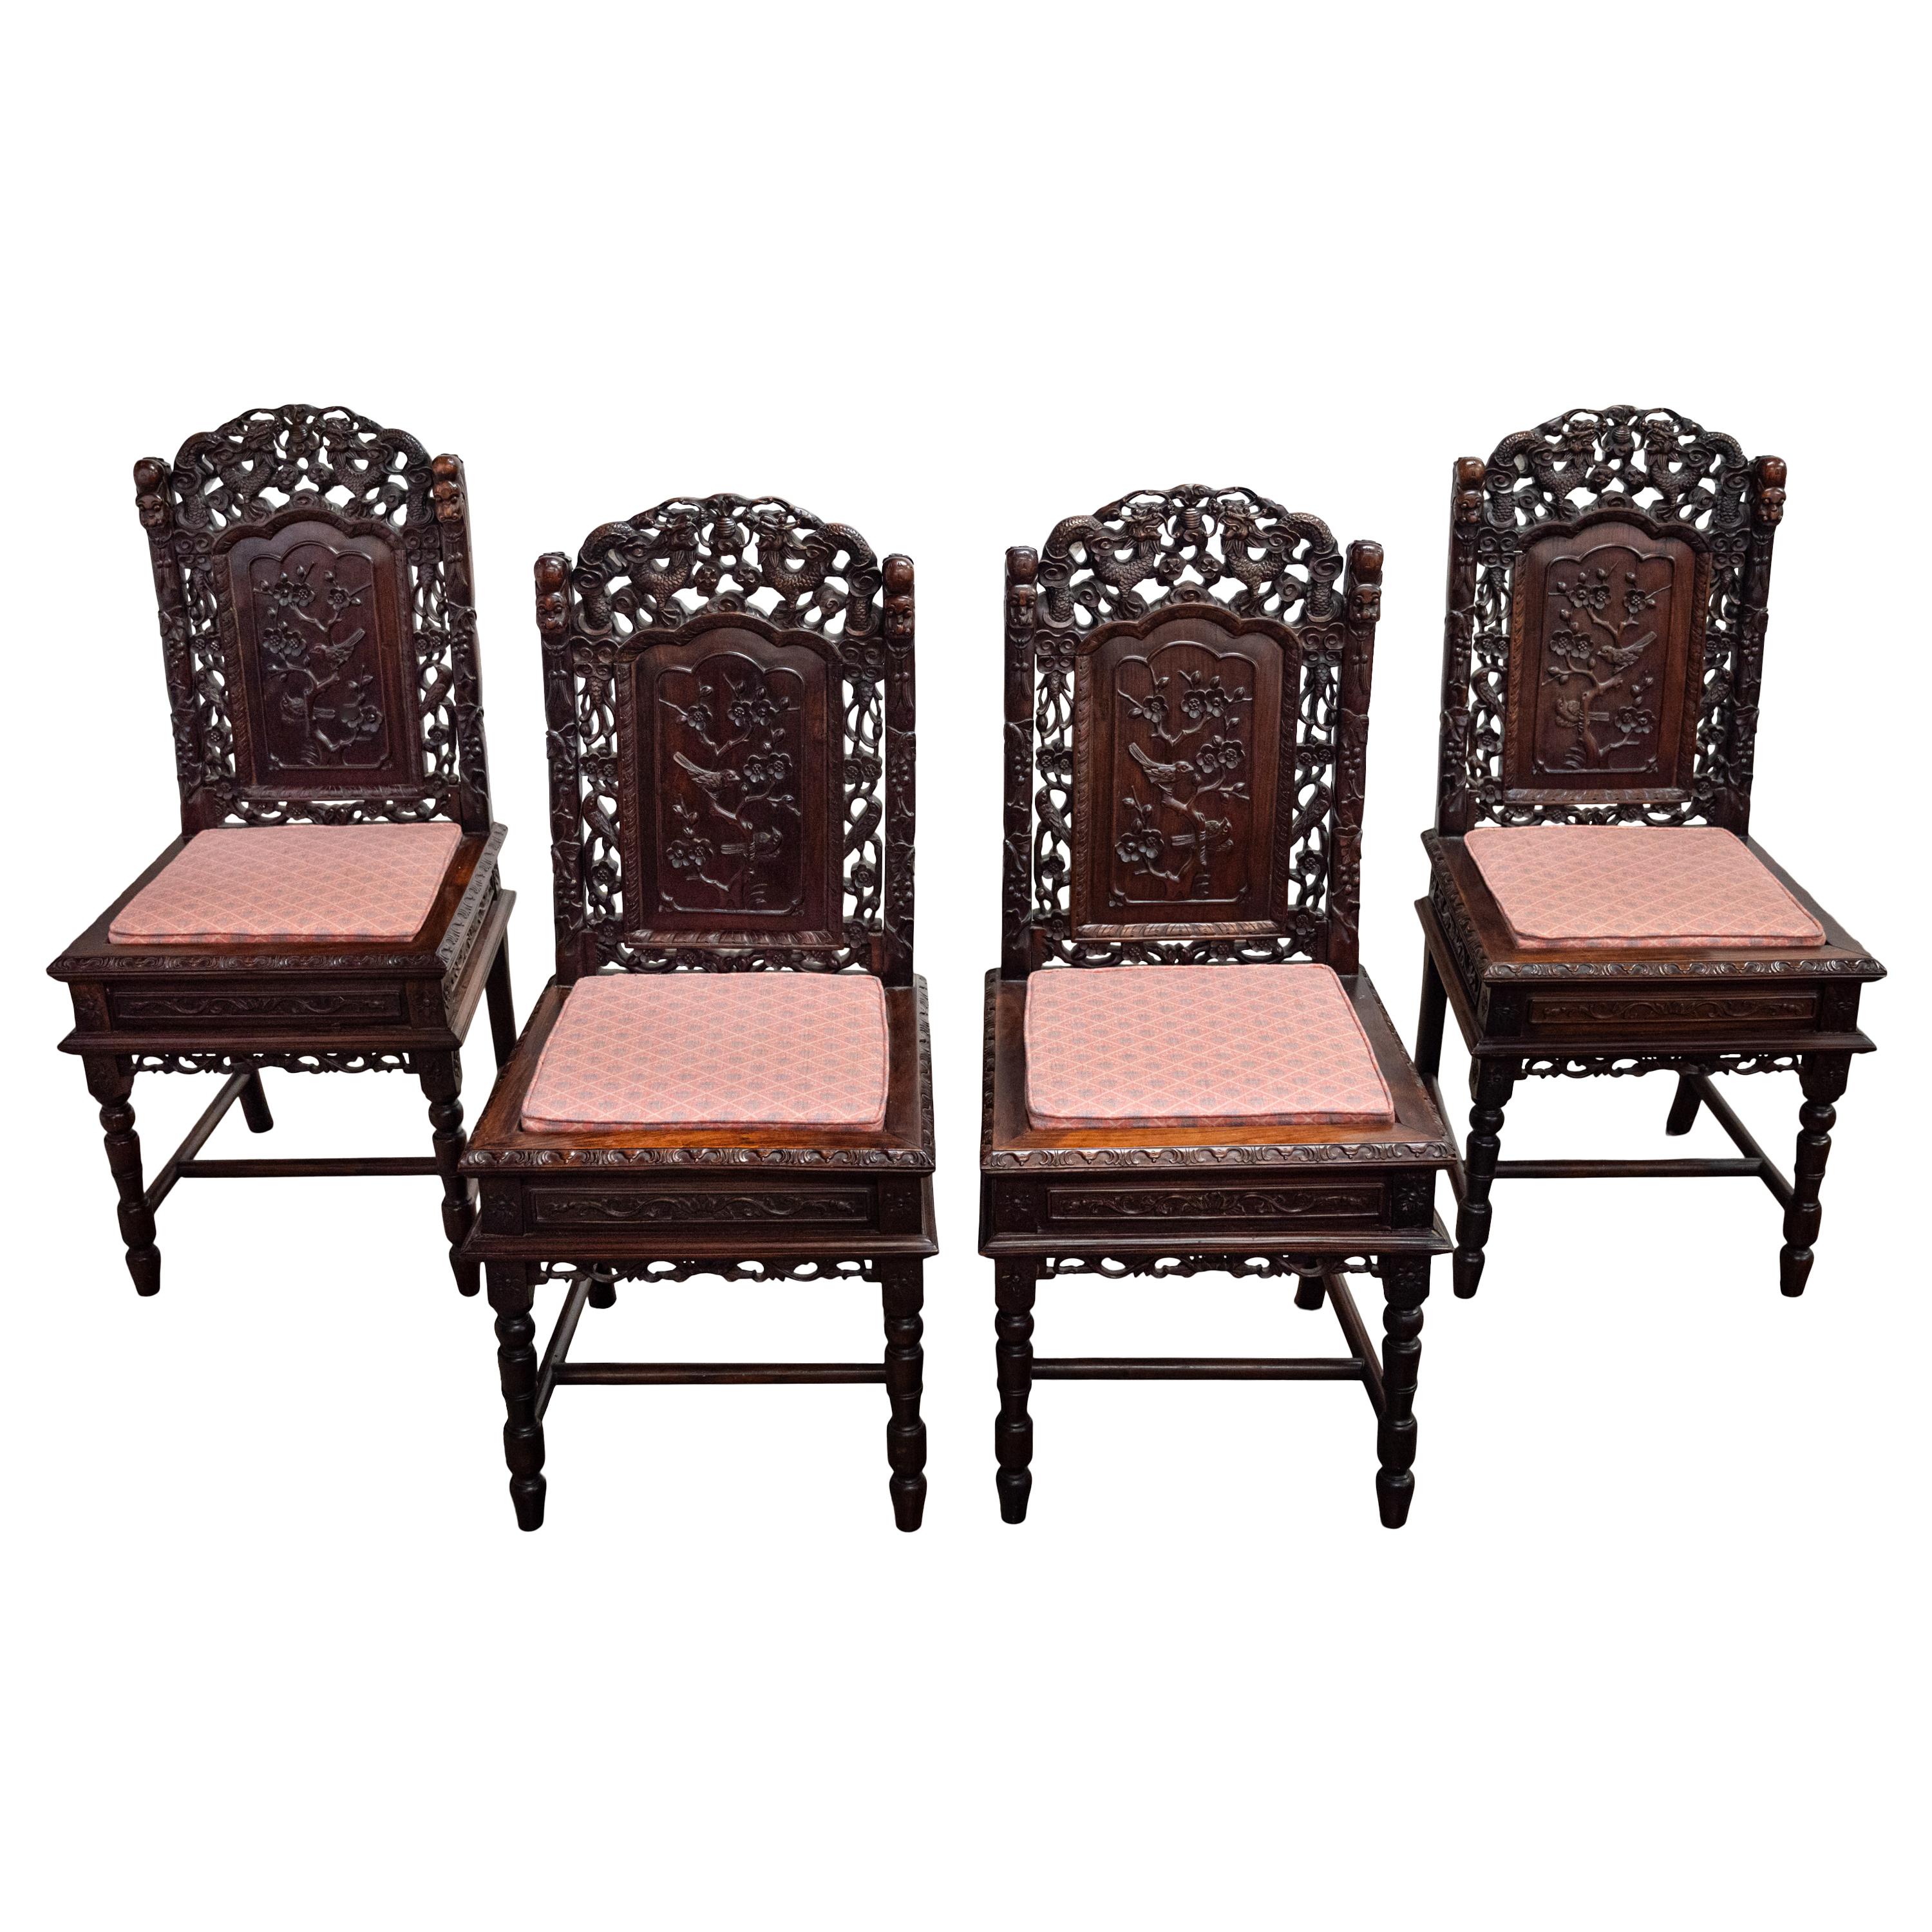 Vier antike Qing Dynasty Chinese Carved Rosewood Side Dining Dragon Chairs 1880 (Chinesischer Export) im Angebot